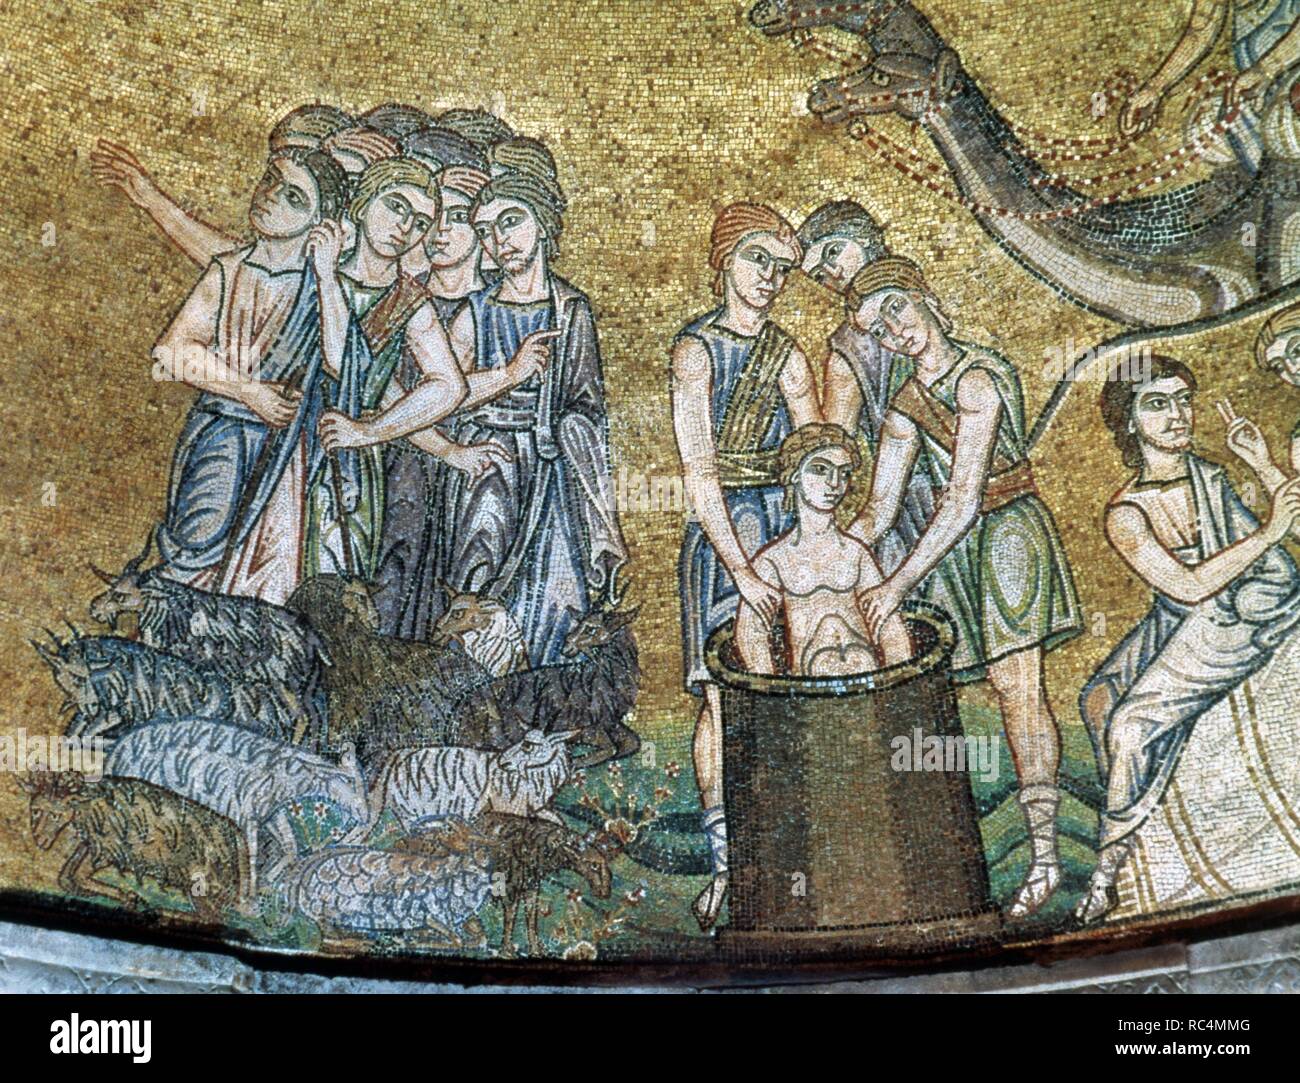 Italy. Venice. Saint Mark's Basilica. Mosaic. Joseph Thrown in a Well by his Brothers. 14th centuries. Stock Photo